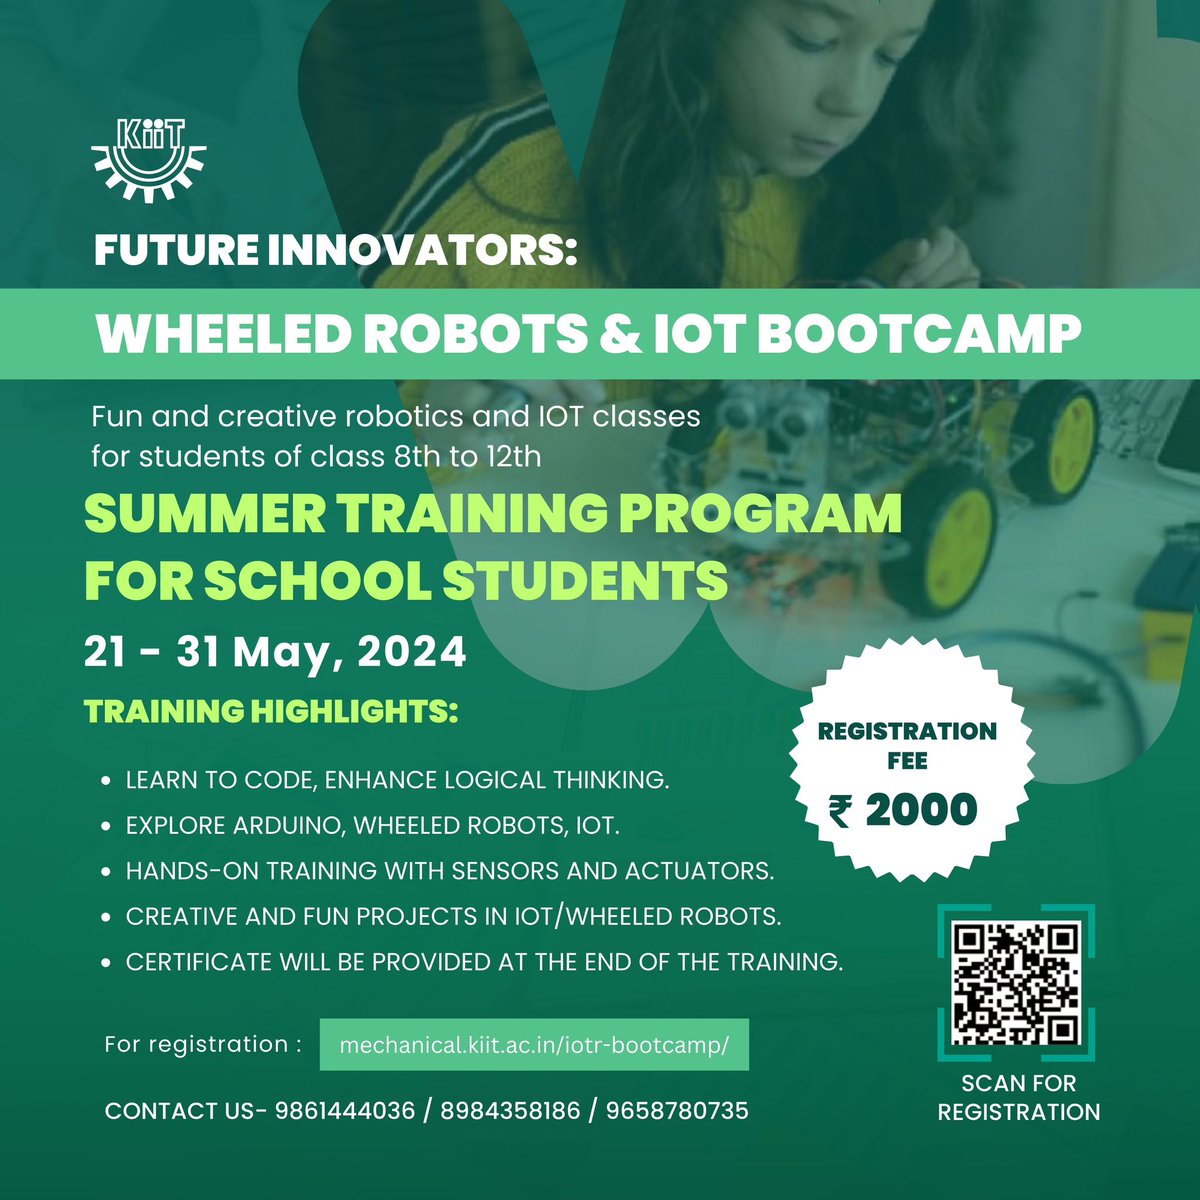 Dive into the exciting world of robotics and IoT in our fun and creative classes tailored for students from classes 8th to 12th. Join us from May 21st to 31st, 2024, and embark on an unforgettable journey of innovation and discovery! #KIITSummerTraining #FutureInnovators